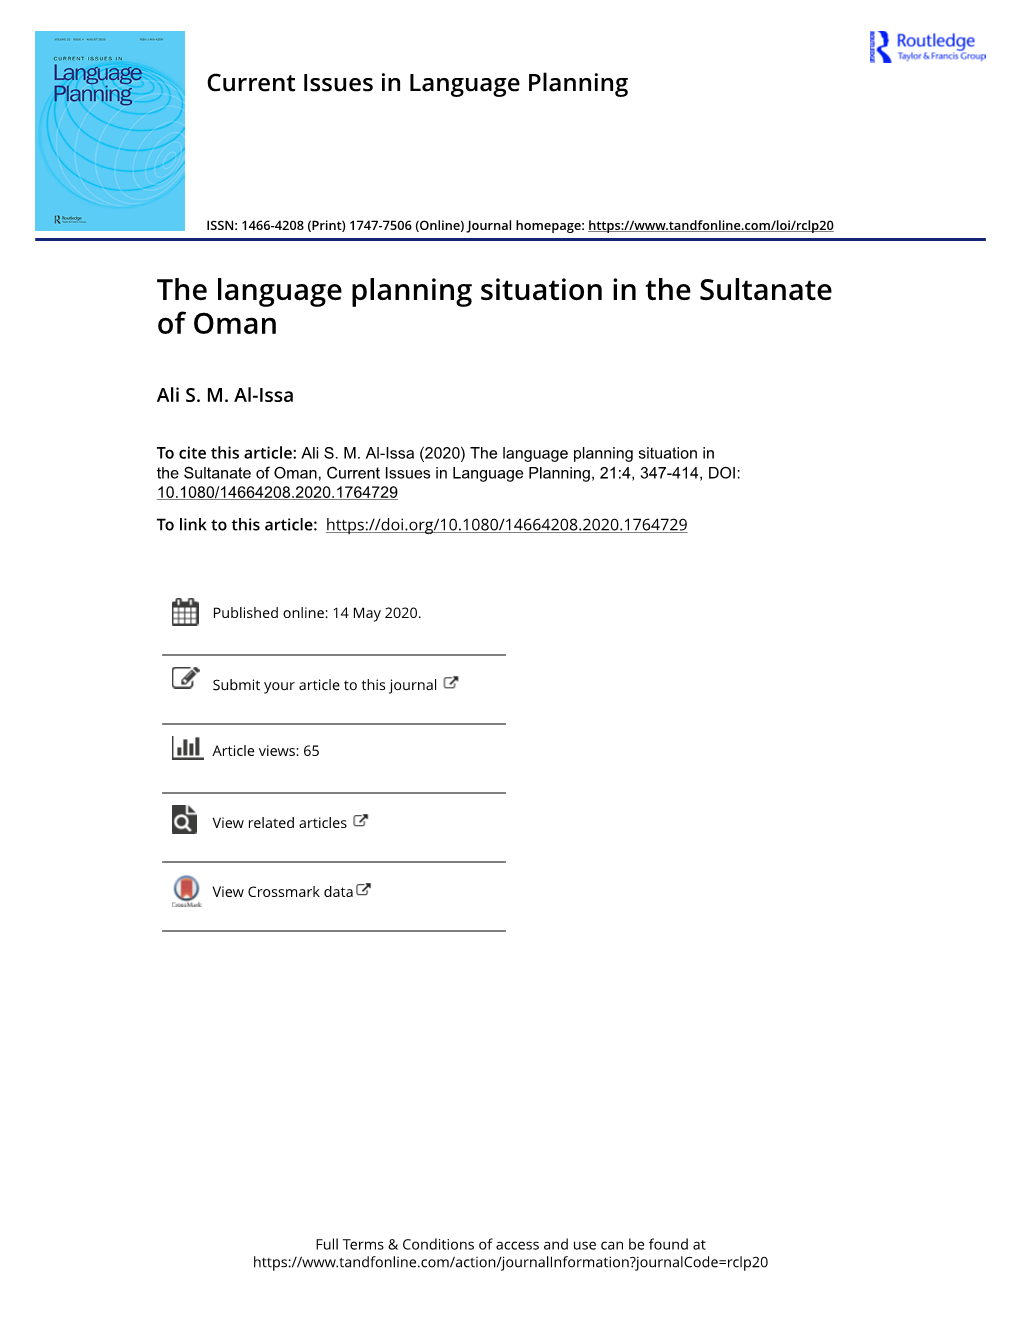 The Language Planning Situation in the Sultanate of Oman